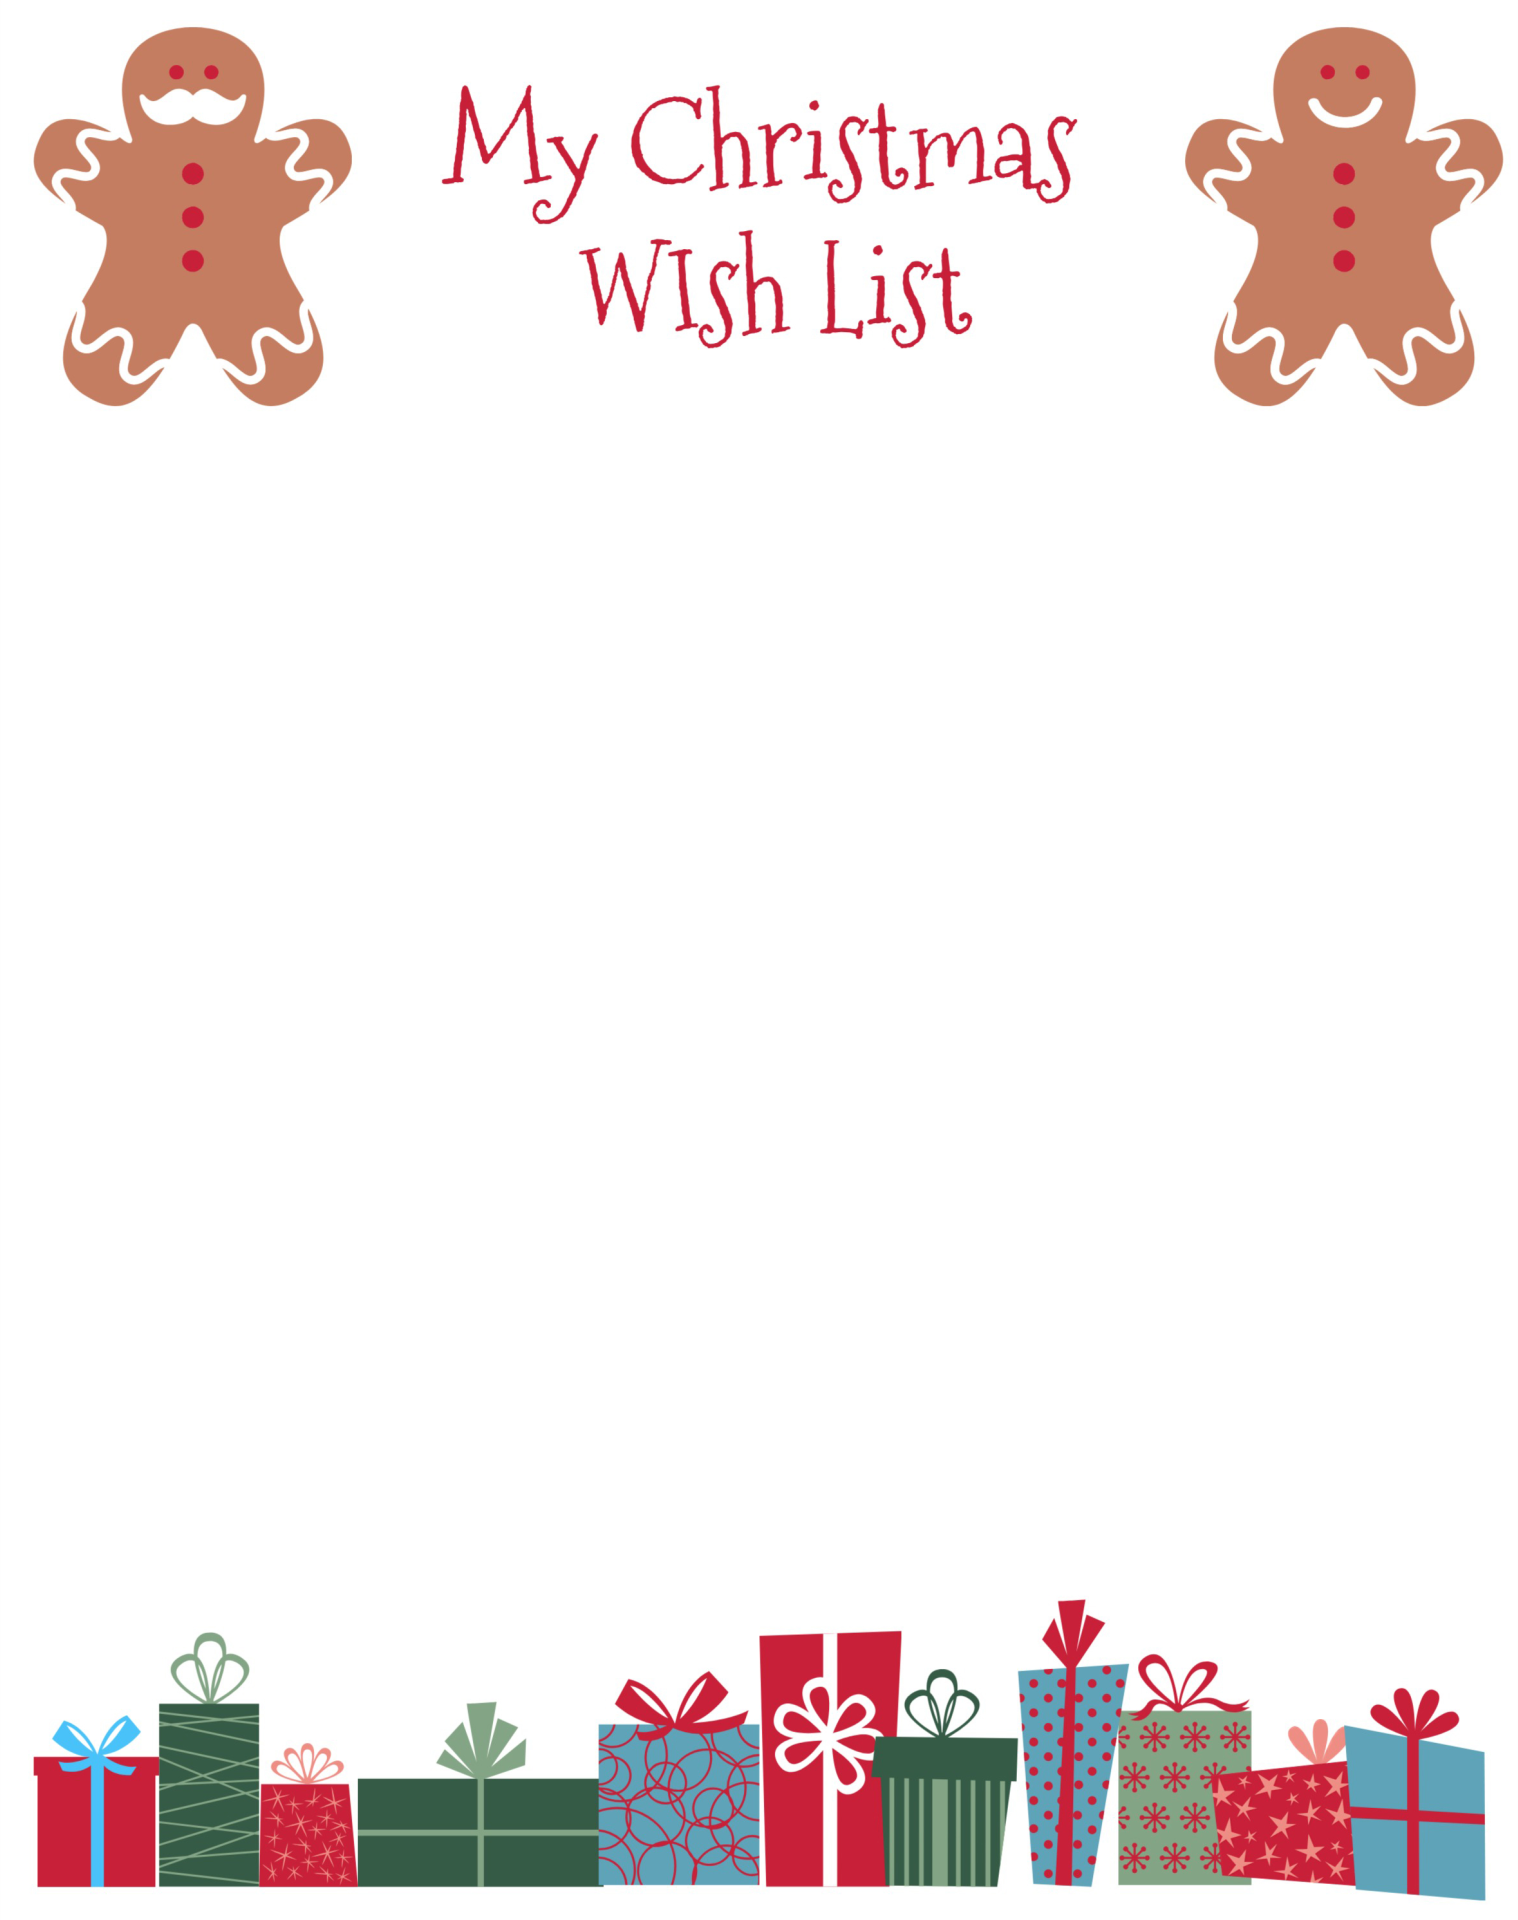 Christmas Wish List Template Free Printable Doctemplates Images and